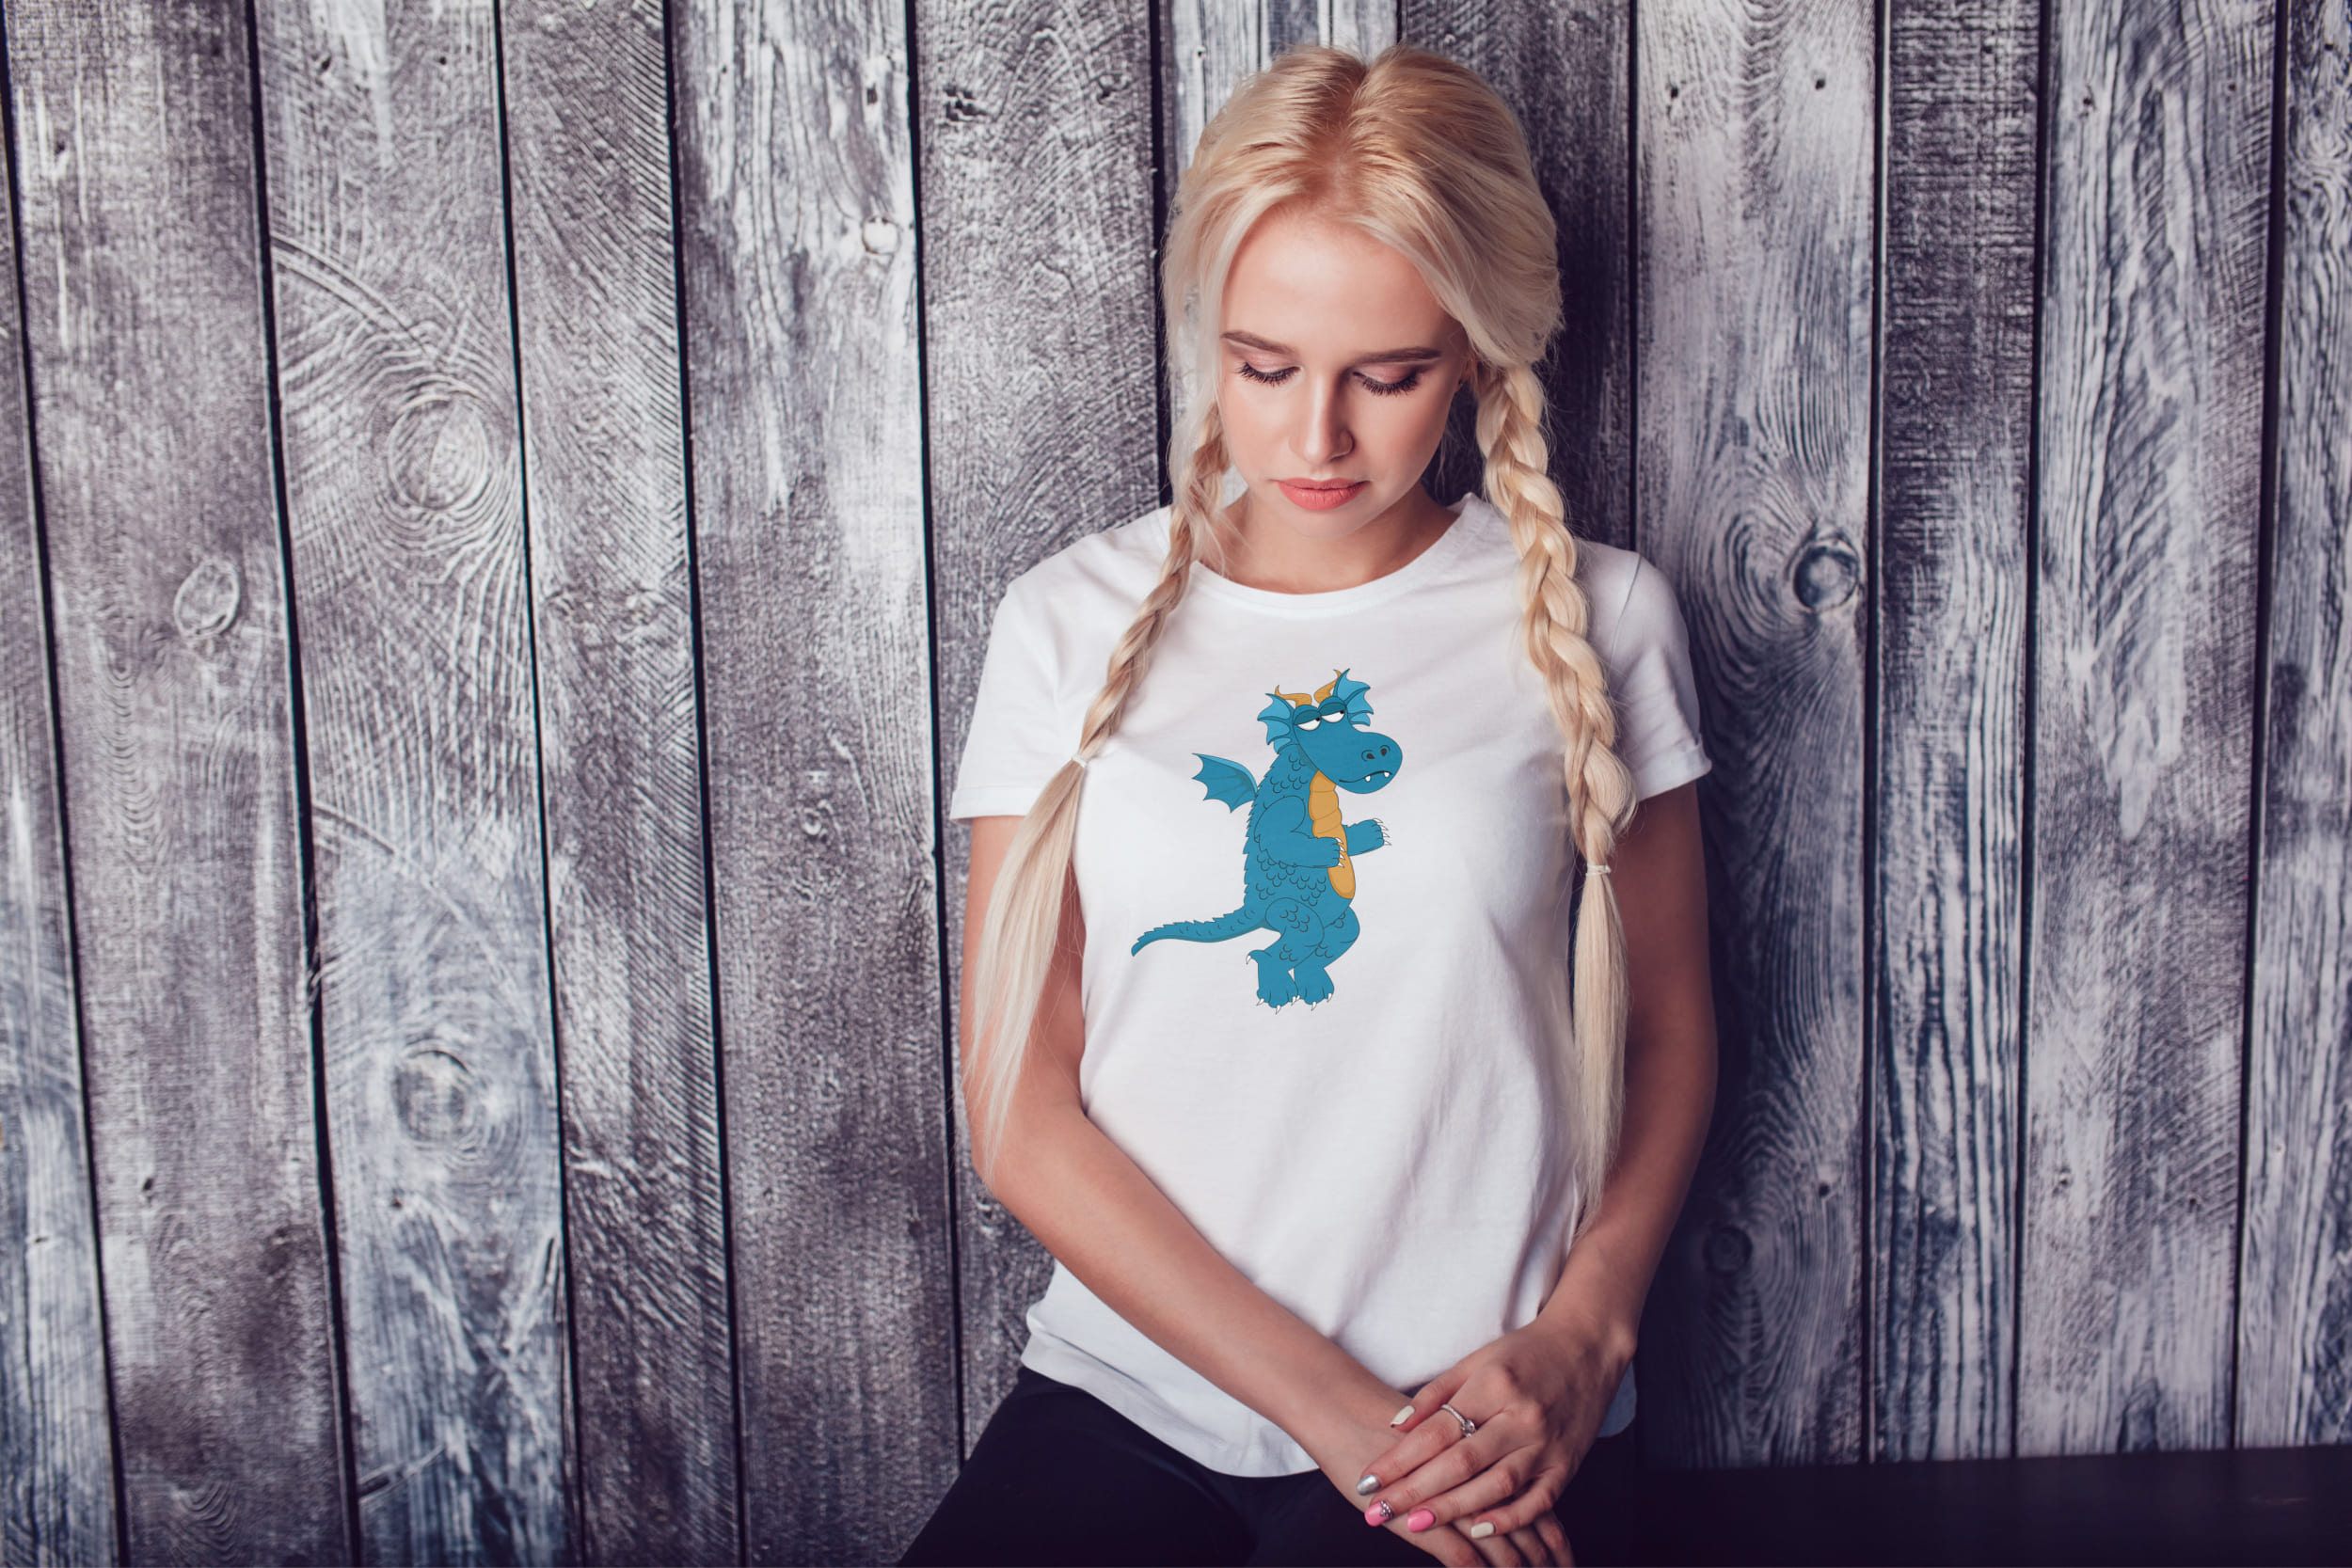 A girl with blond hair and a white T-shirt with a turquoise dragon.